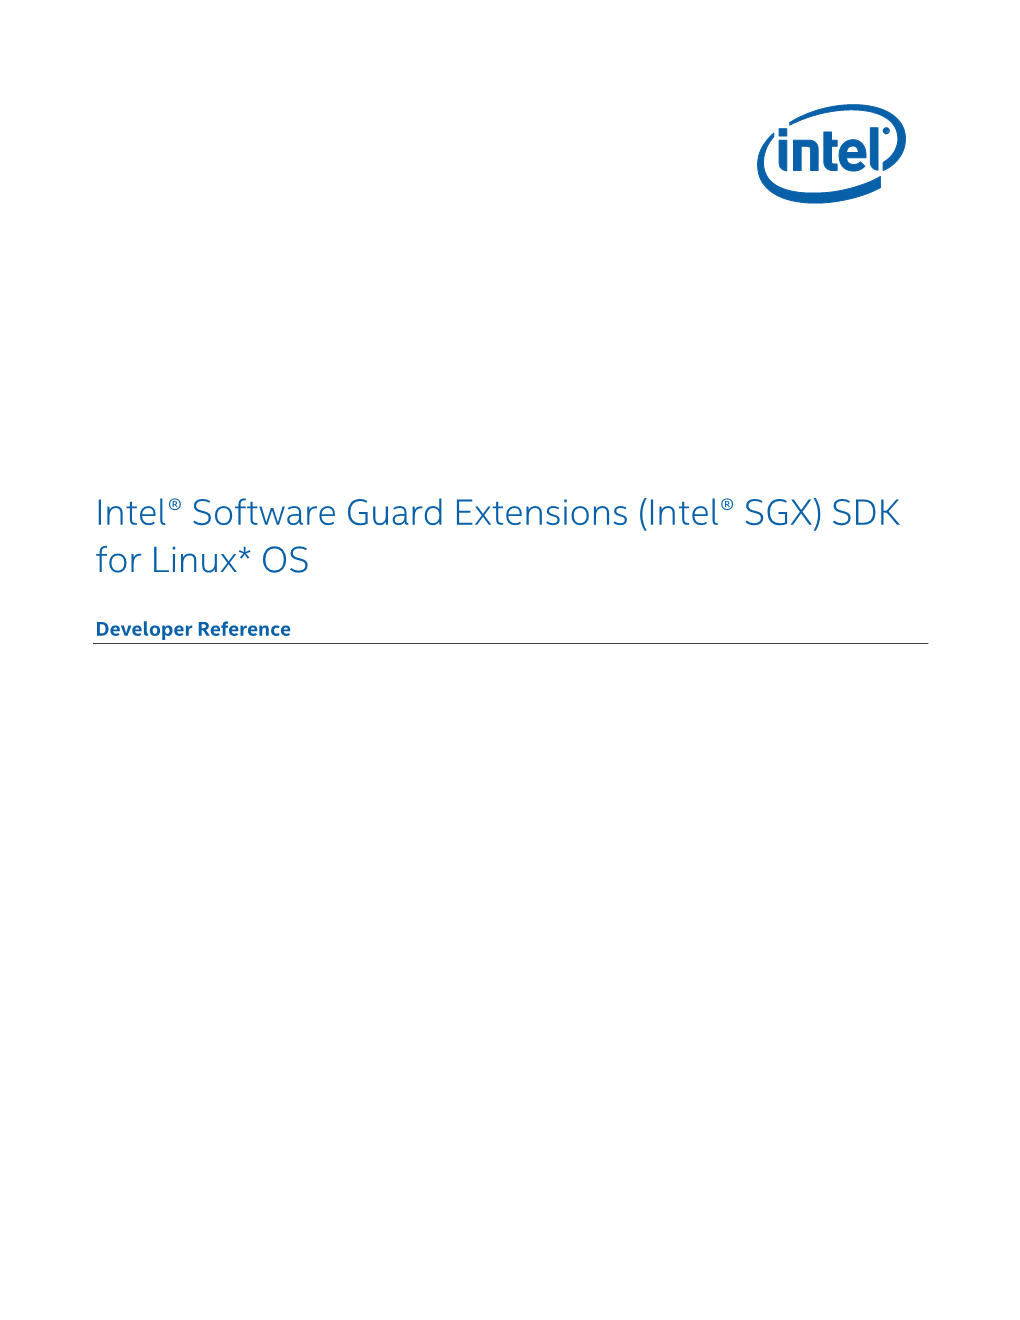 Intel(R) Software Guard Extensions Developer Reference for Linux* OS